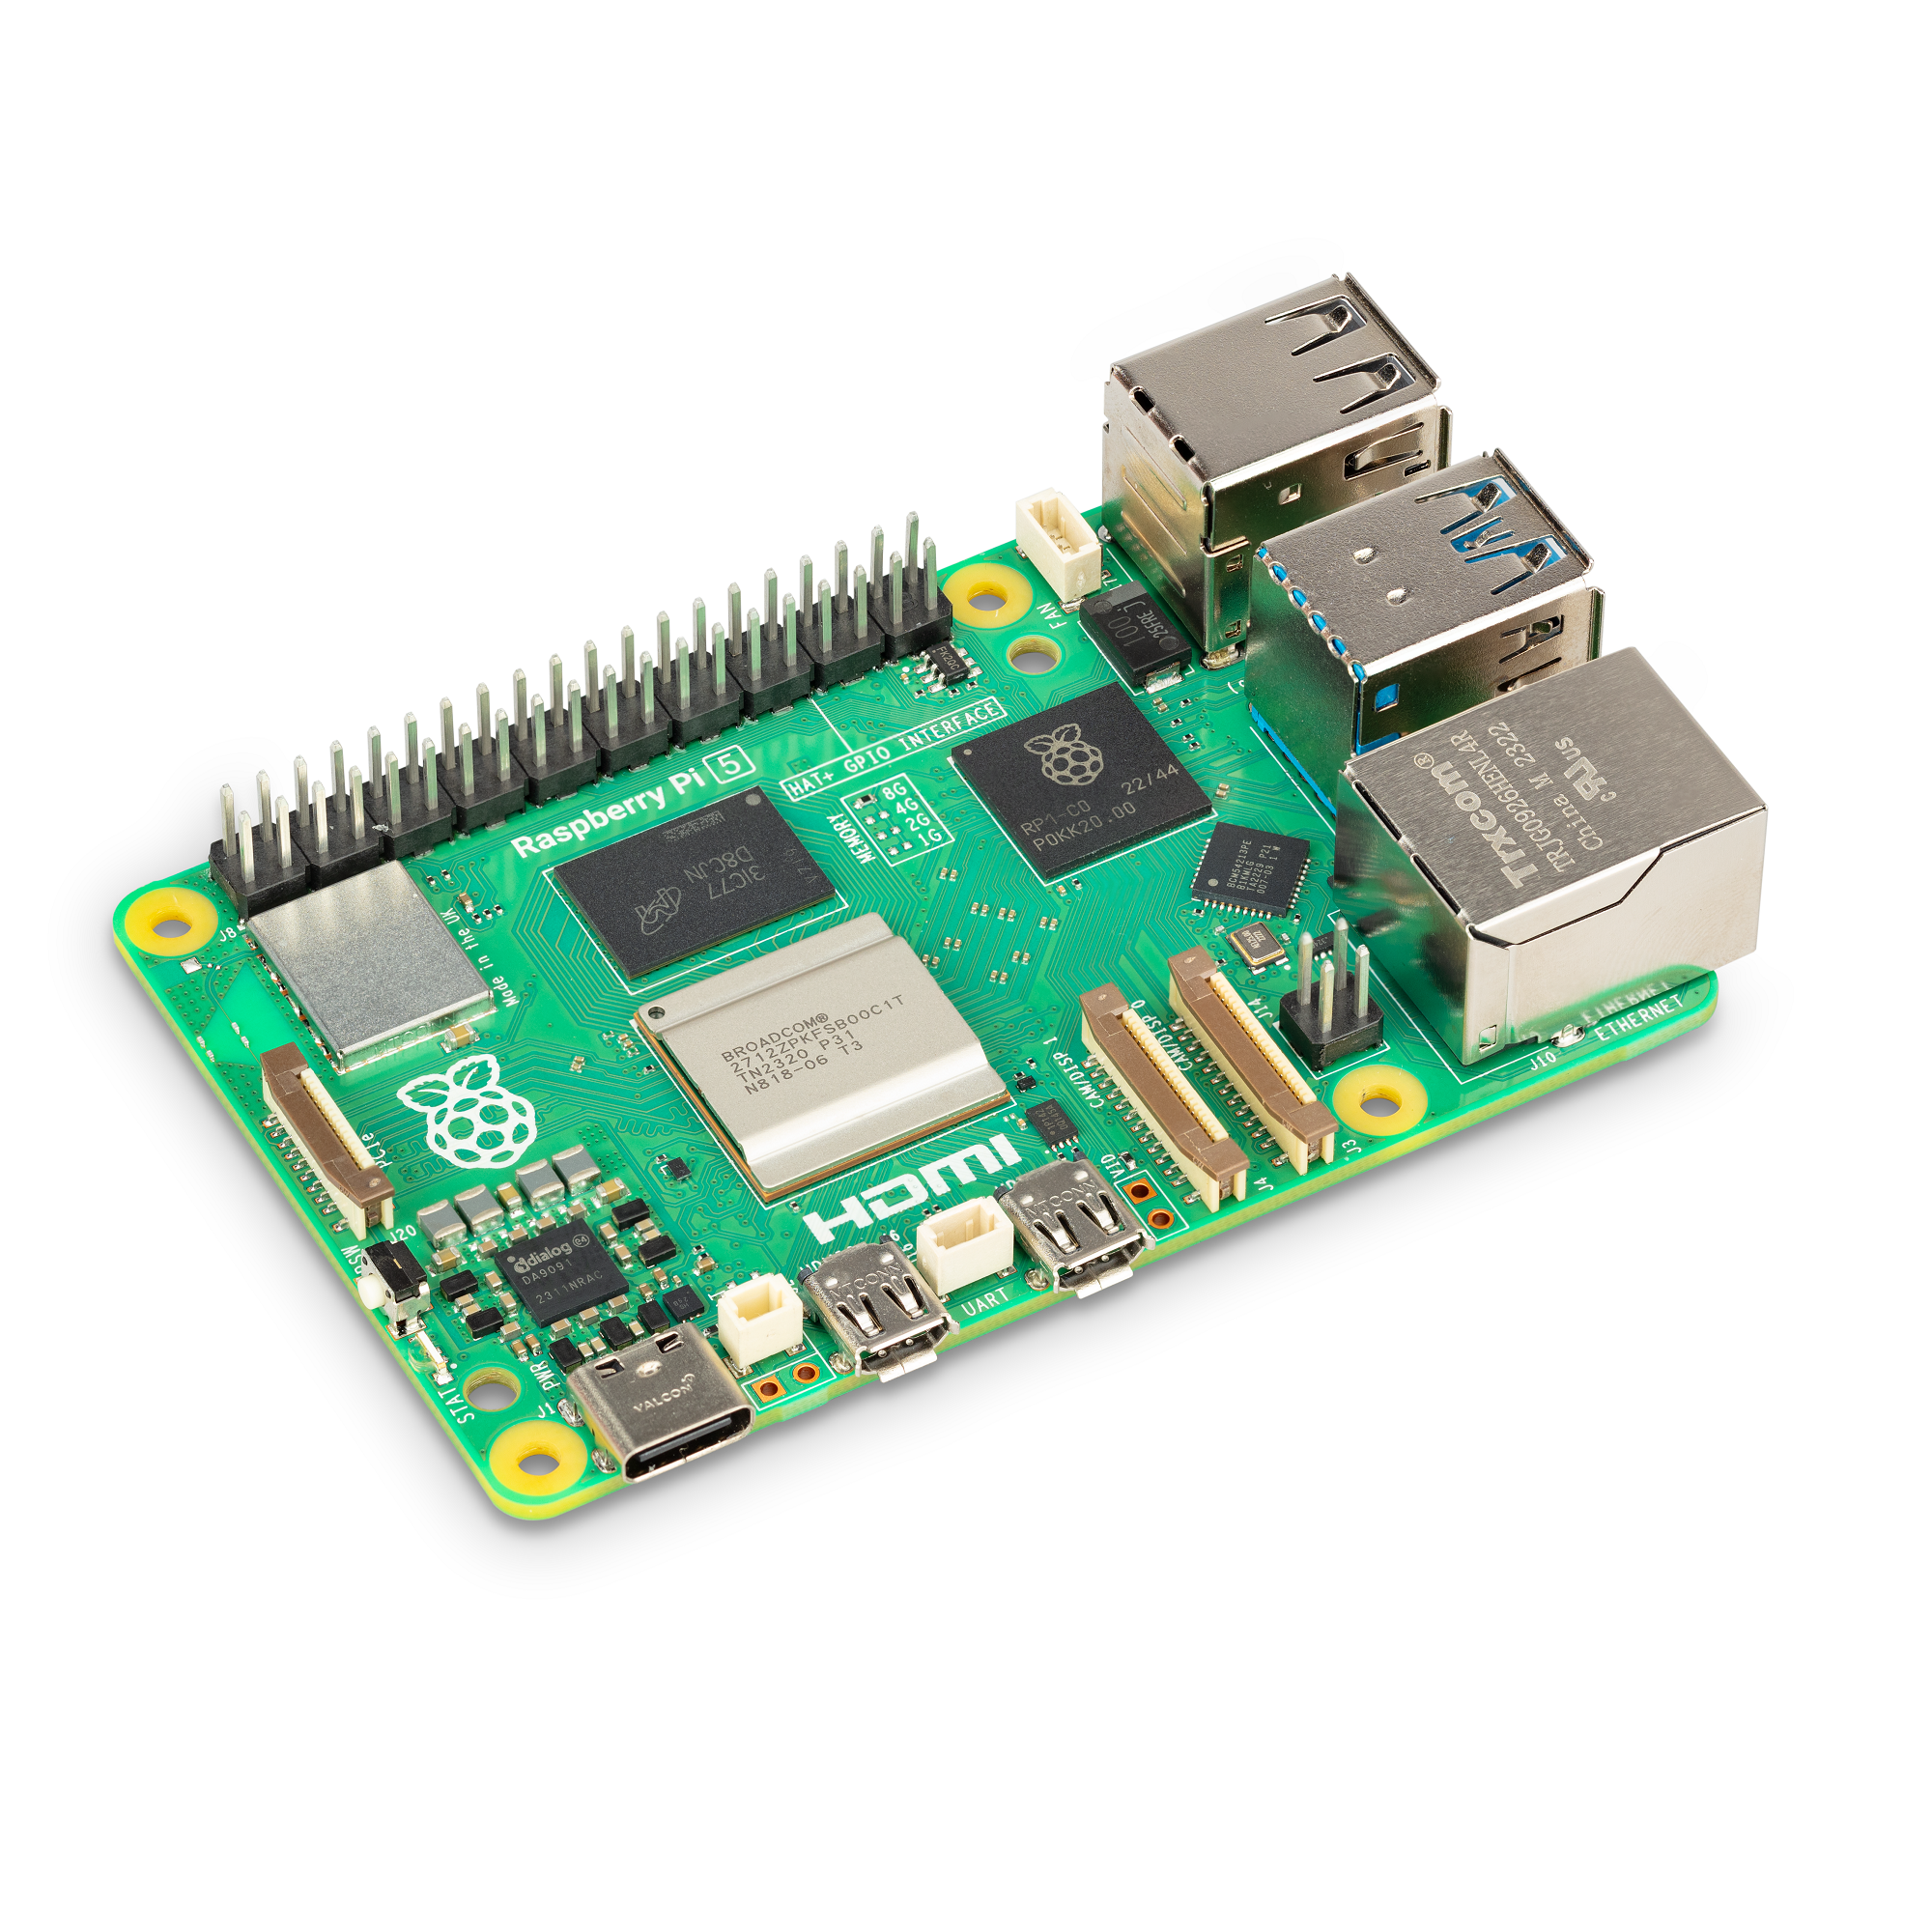 Buy Raspberry Pi 5 Model 8GB from Official India Distributor